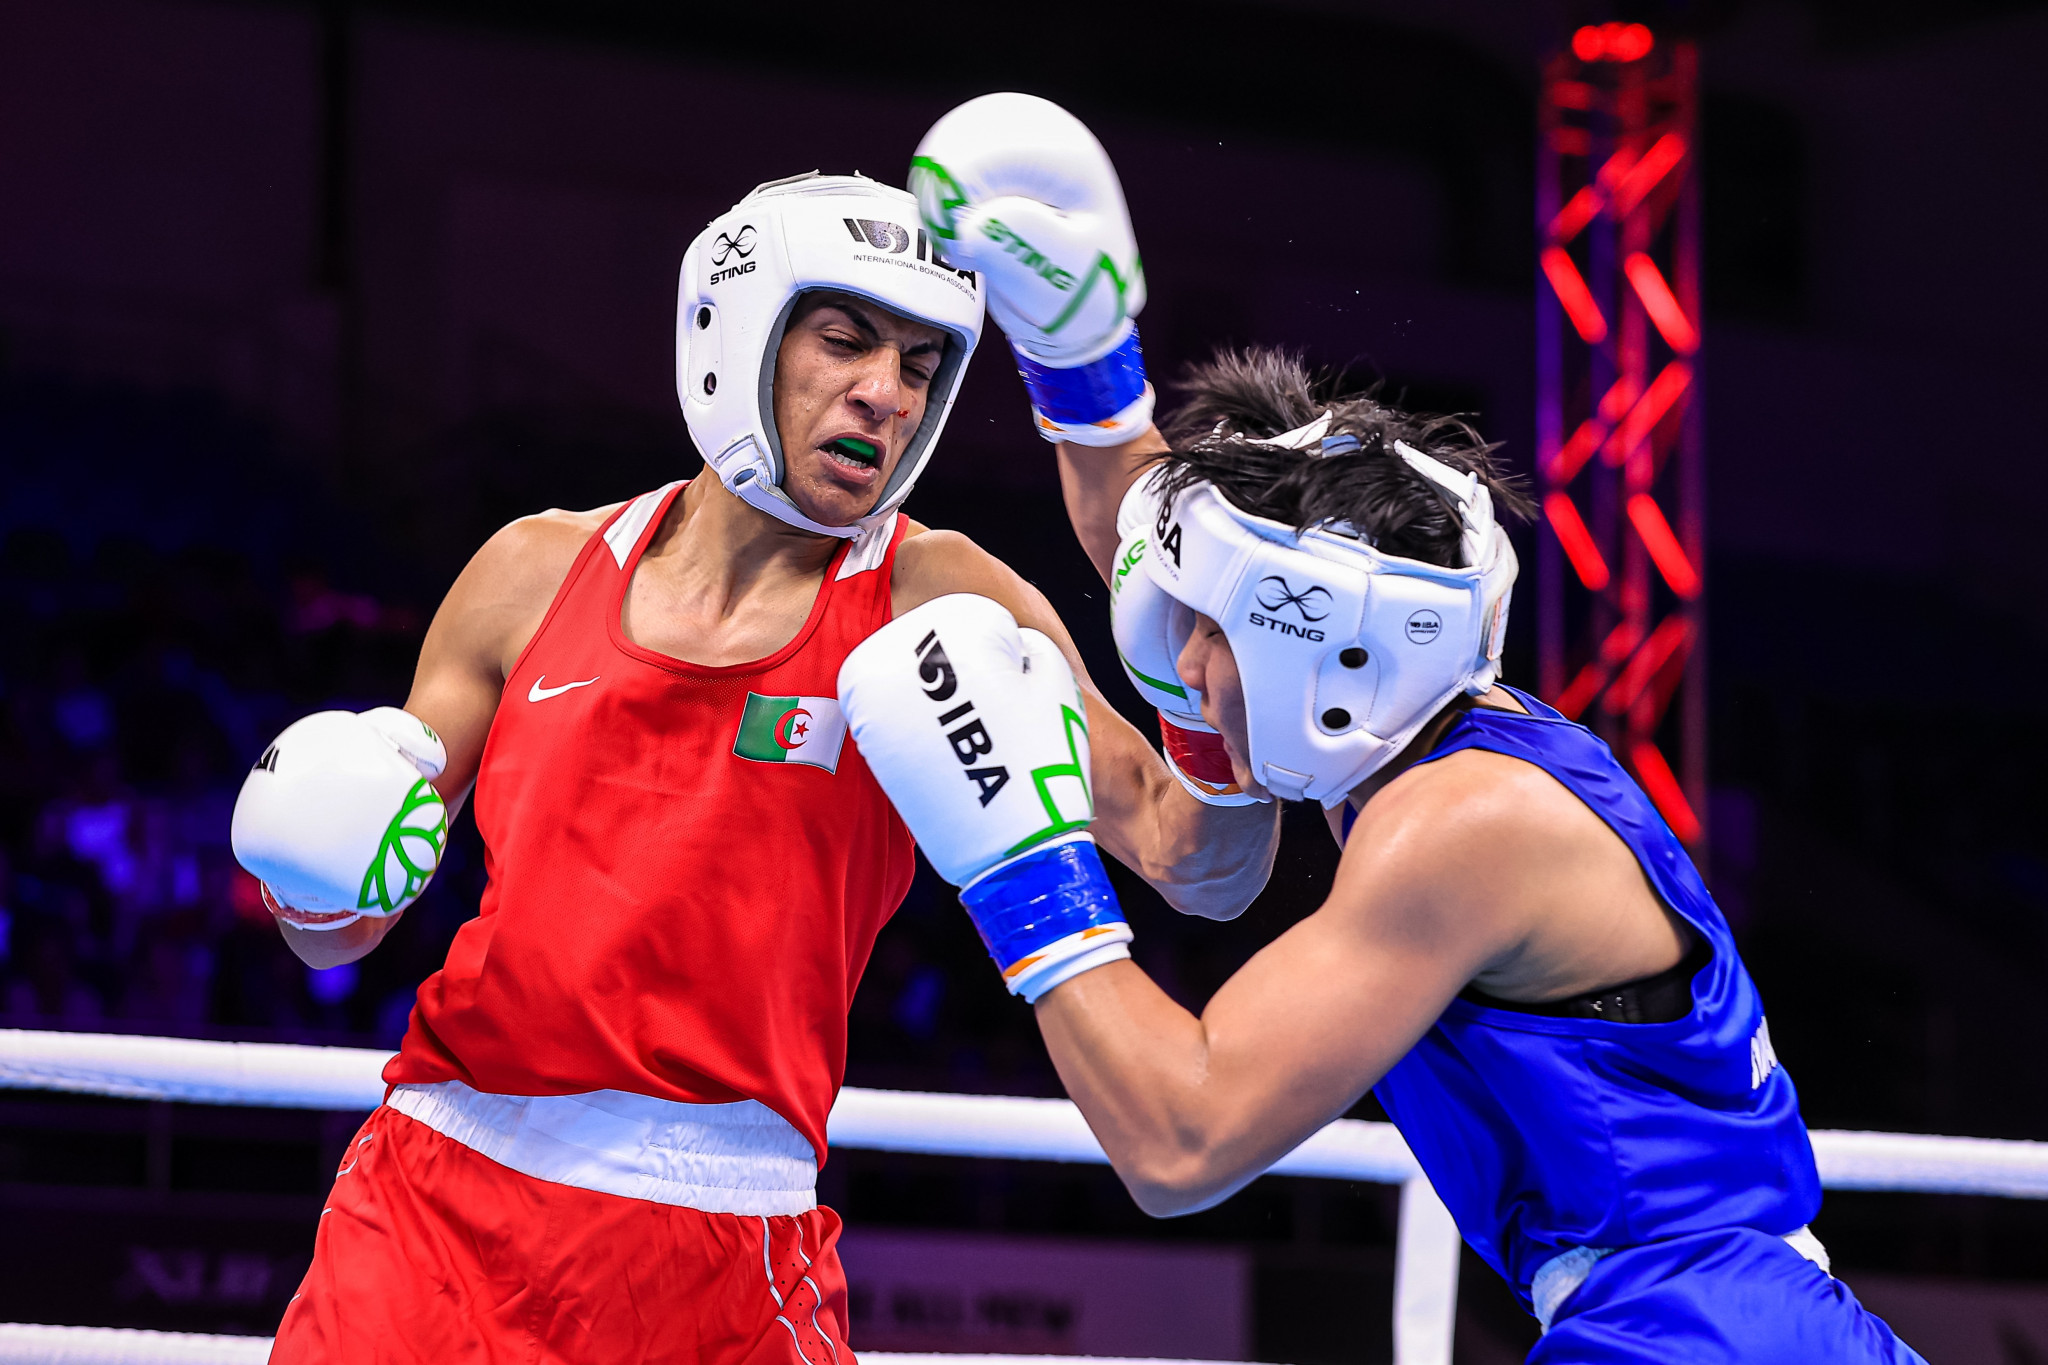 Algeria's Imane Khelif proved too hot to handle for Thailand's Janjaem Suwannapheng in their welterweight semi-final tussle ©IBA